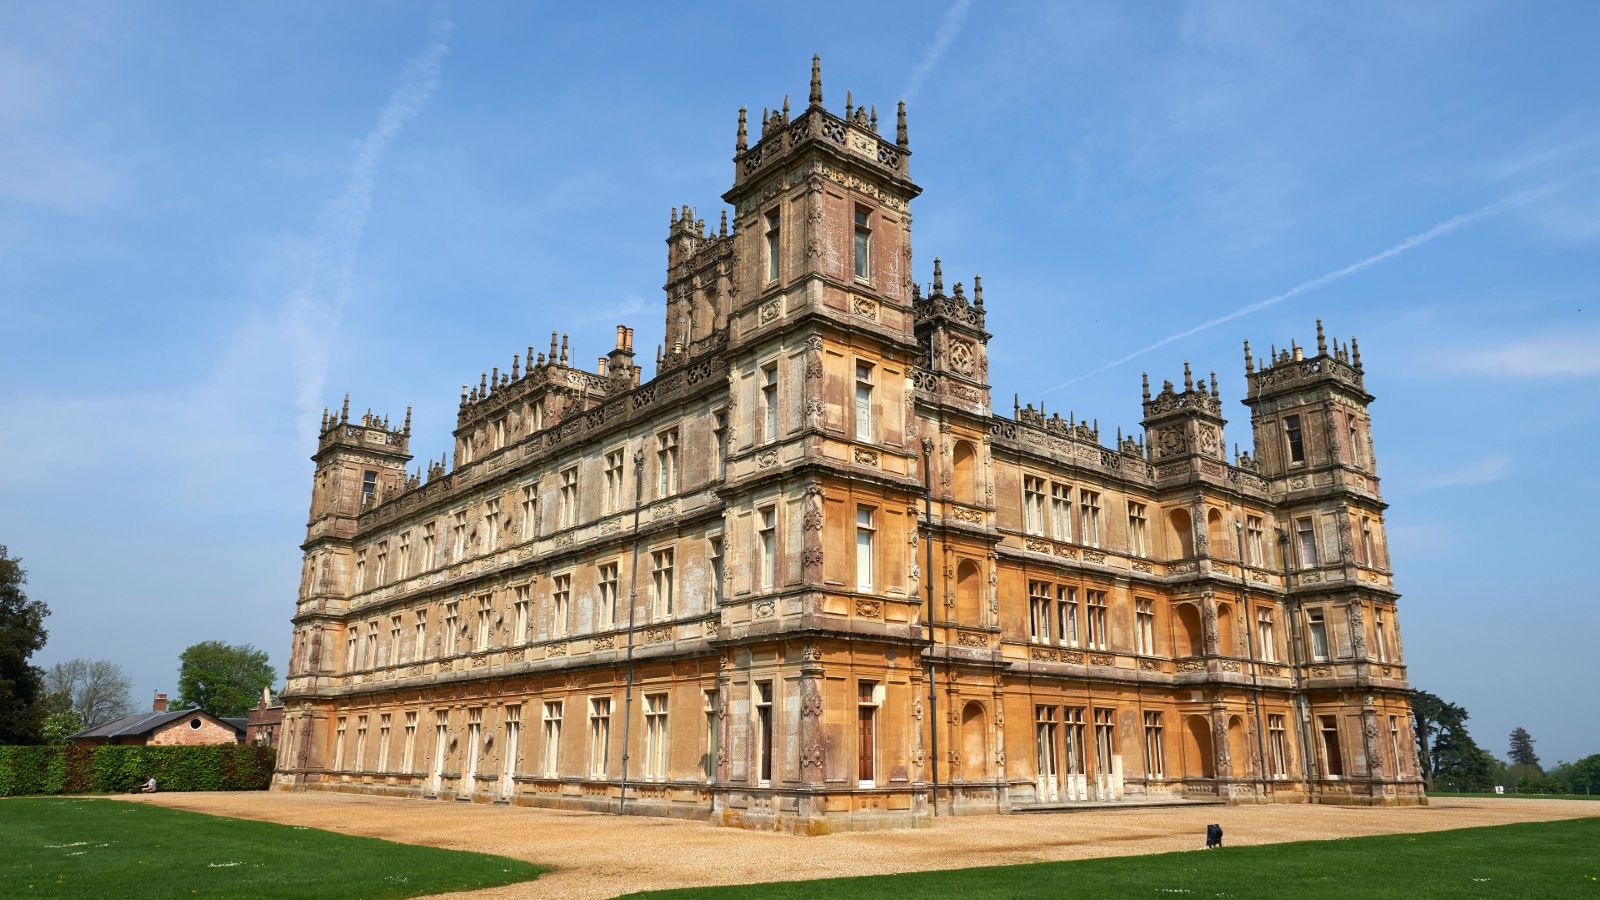 <p>                     <strong>Location: </strong>Hampshire, RG20 9RN |<strong> Website:</strong> highclerecastle.co.uk                   </p>                                      <p>                     Downton Abbey fans will recognize Highclere Castle as the stately home of the aristocratic Crawley family. The Grade I-listed house was once the site of a medieval palace but was transformed in the 19th century by Sir Charles Barry—architect of London’s Houses of Parliament. The castle is set in 1,000 acres of parkland that was designed by landscape gardener Capability Brown and is also home to an impressive exhibition of Egyptian artifacts.                    </p>                                      <p>                     For a real treat, book in for the castle’s delightful afternoon tea, with sandwiches, scones, and a glass of bubbly.                   </p>